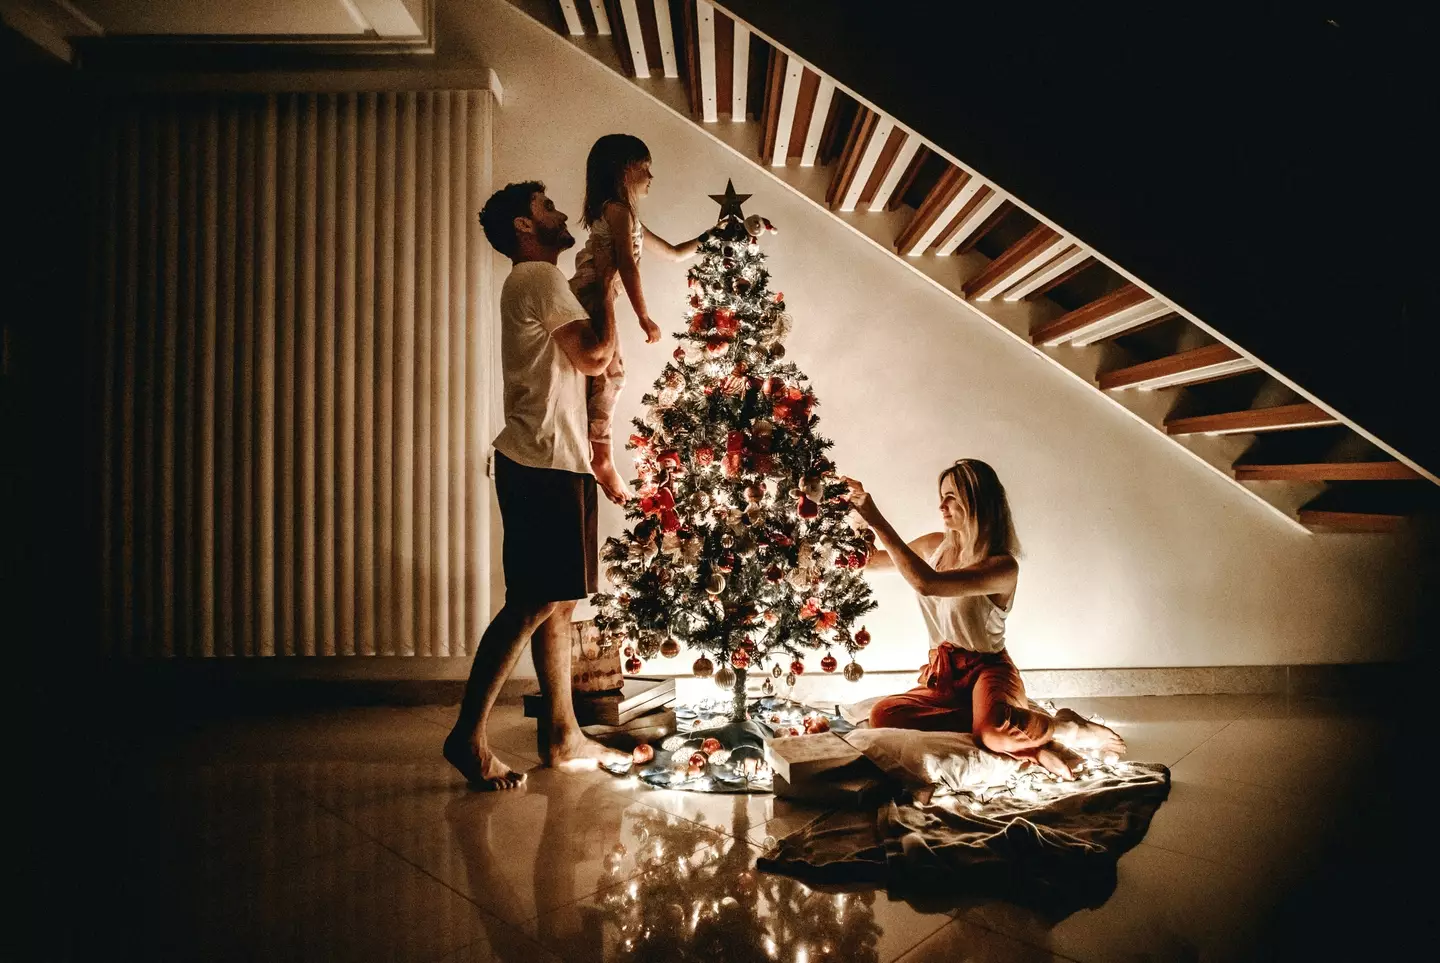 Many families have their own festive traditions.